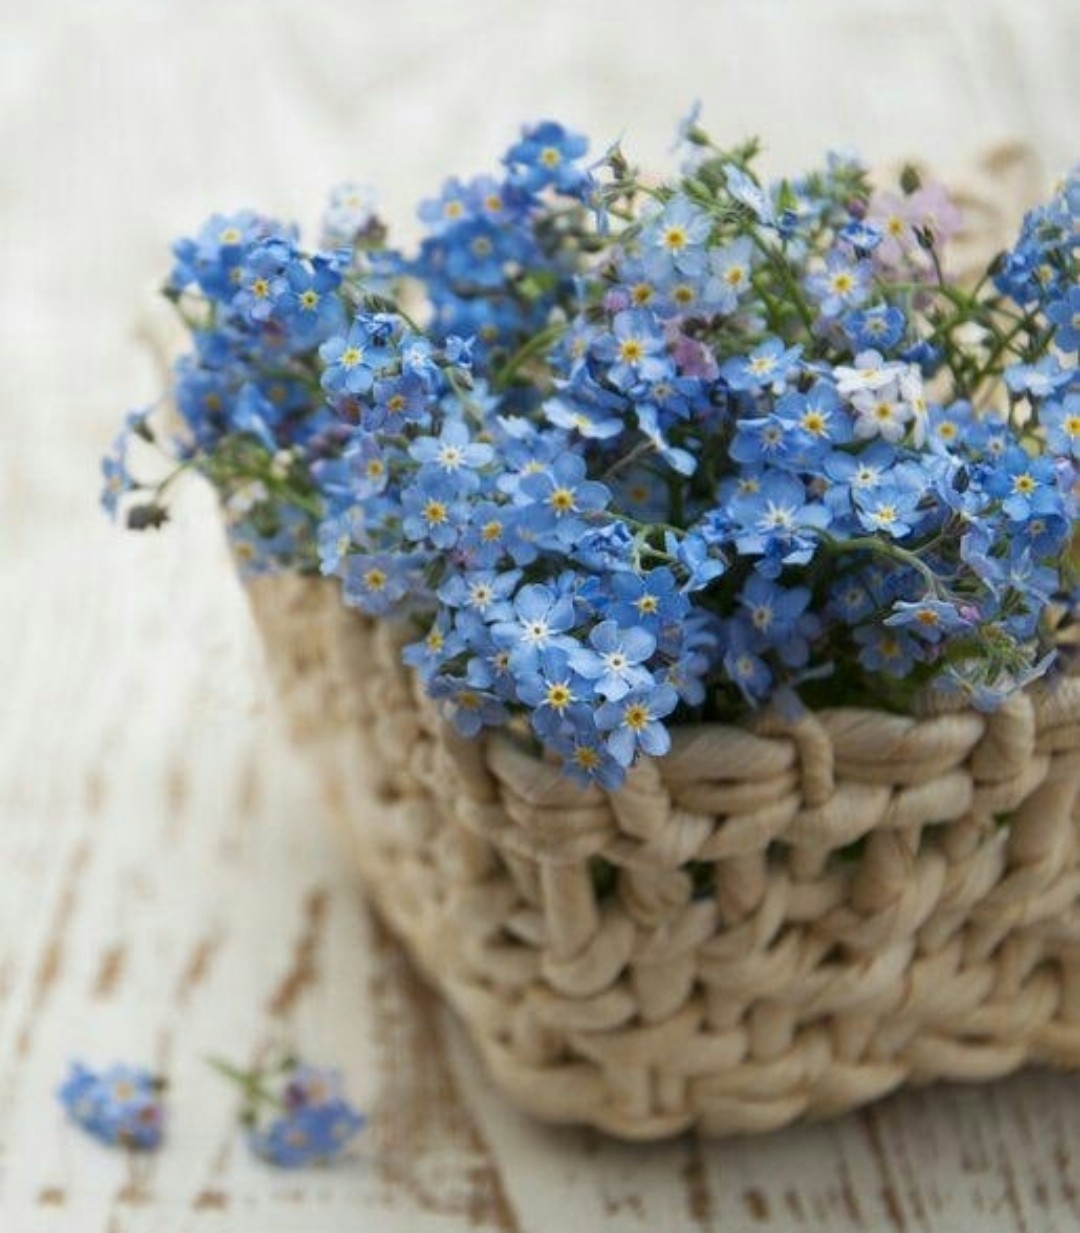 Blue forget me not flowers